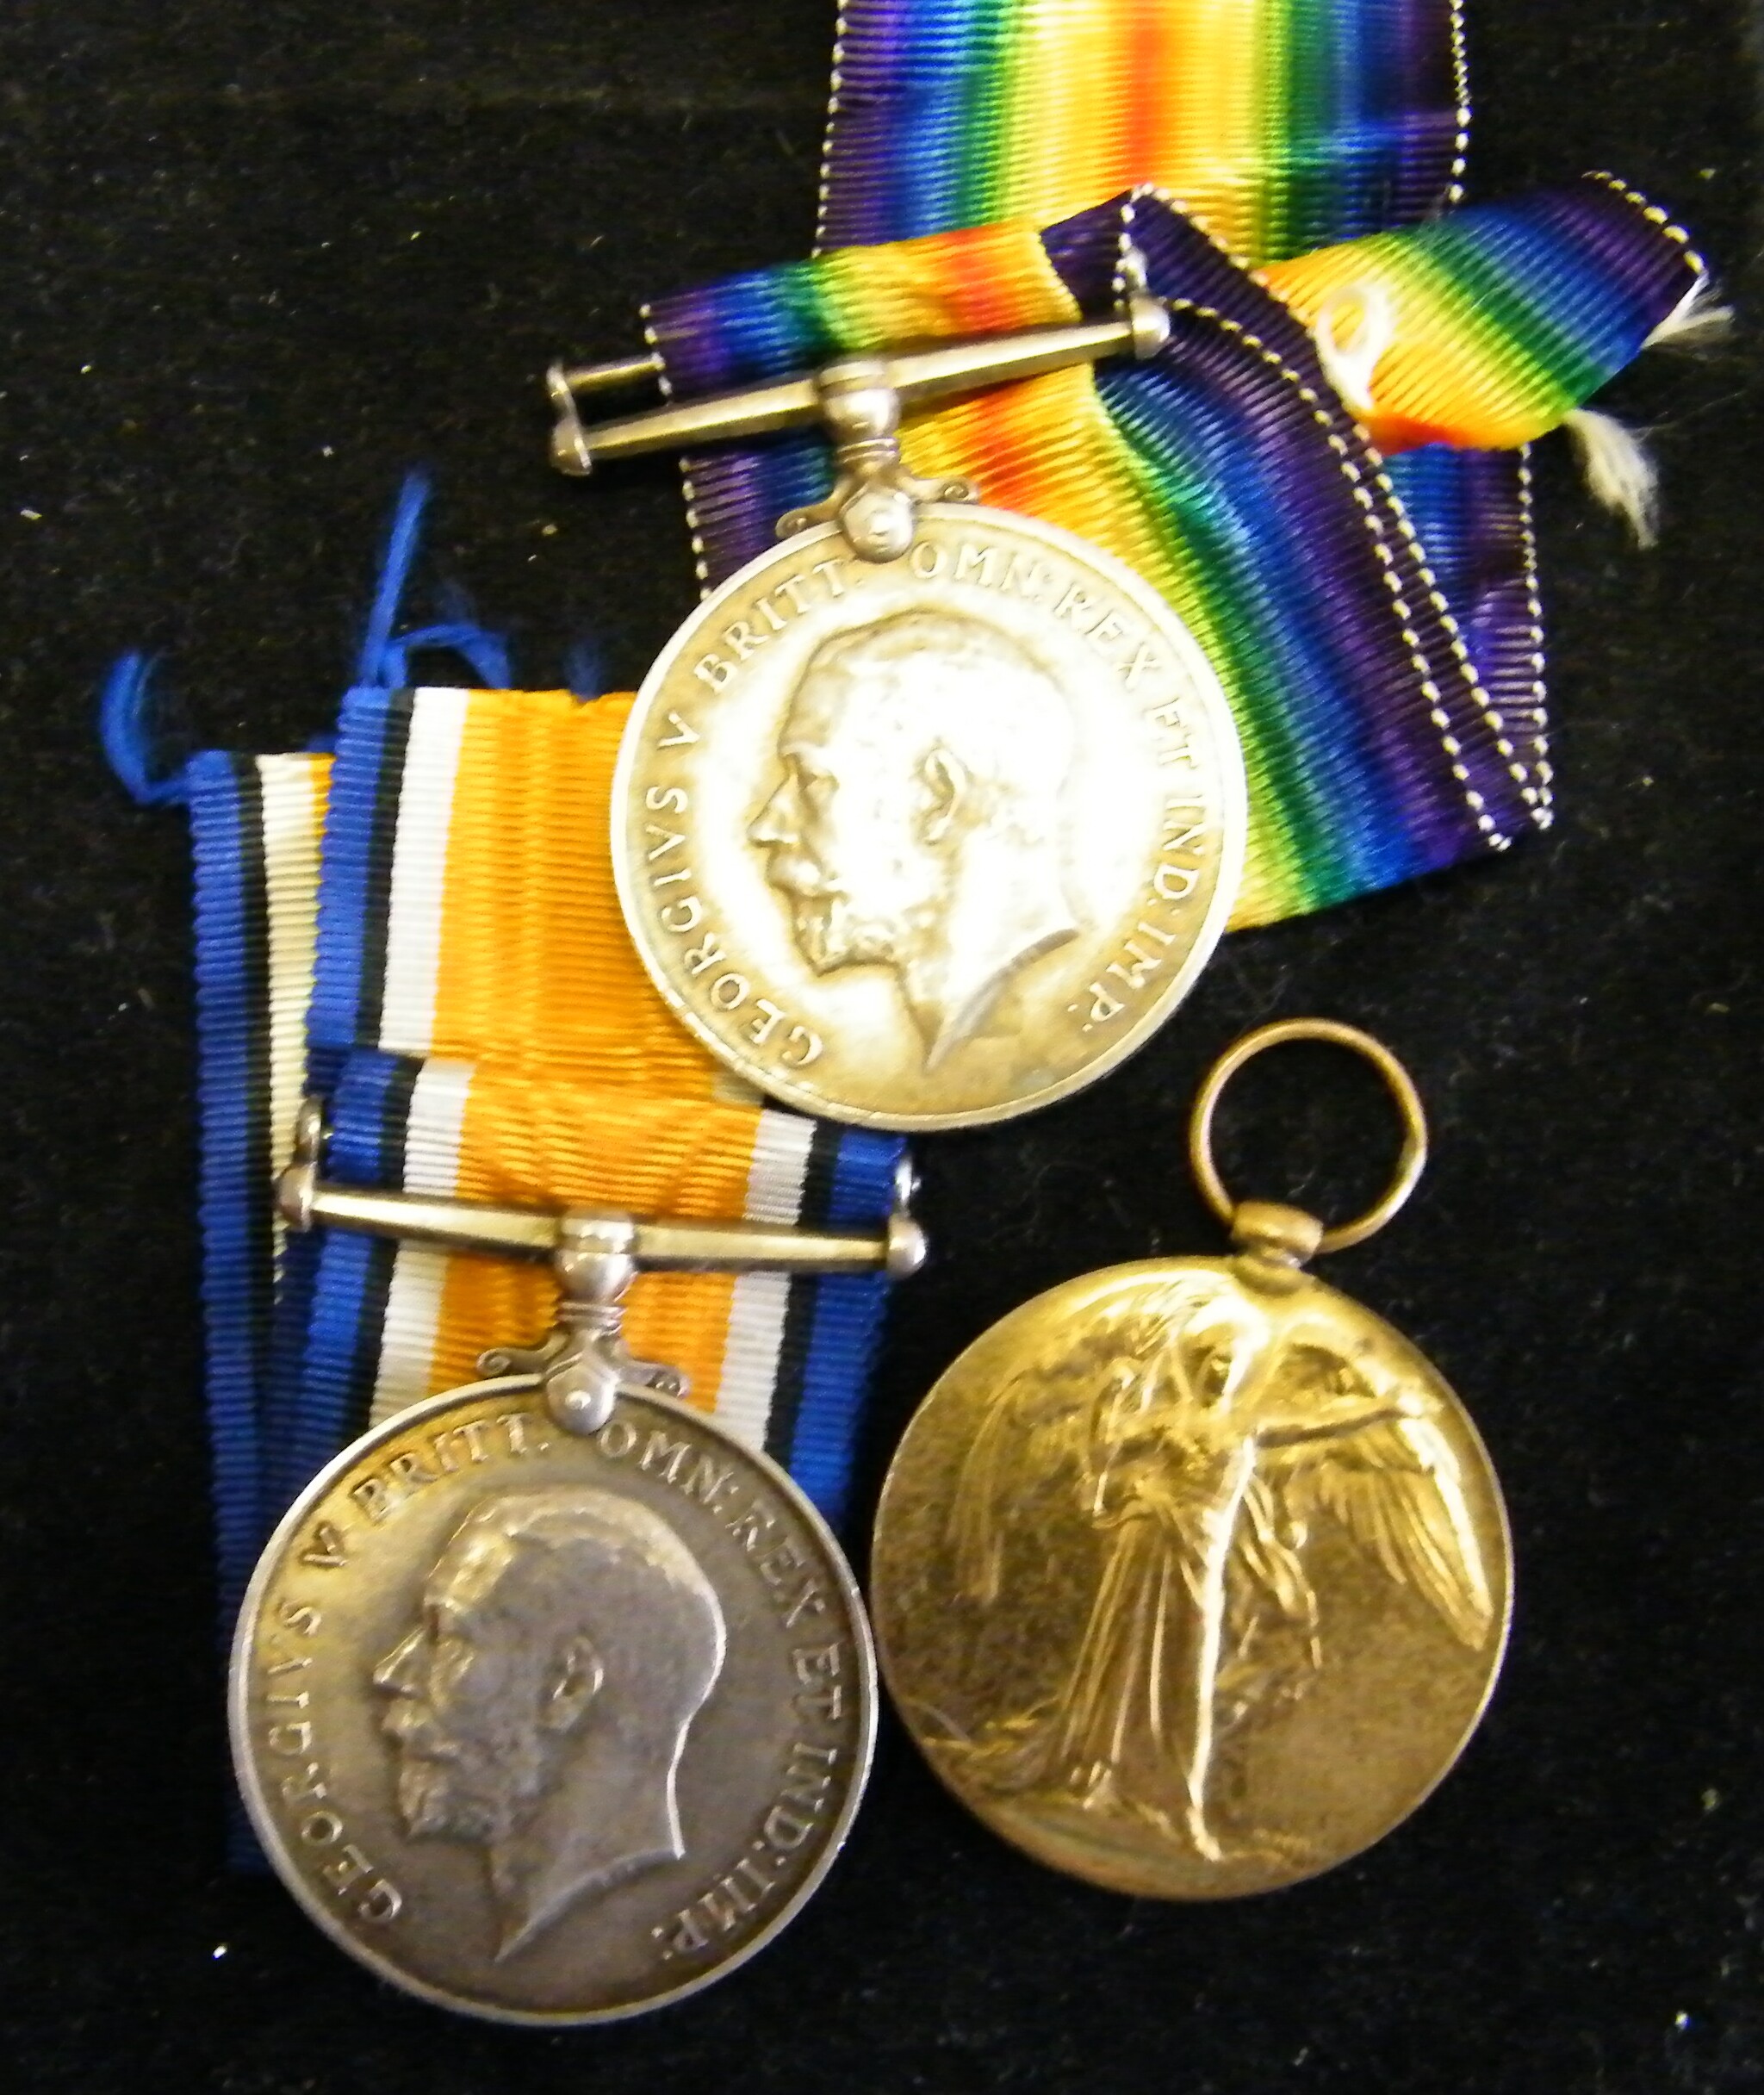 1st World War pair to 209870 SPR.H.W. Oxenham R.E. together with 1st World War medal to 3-7048